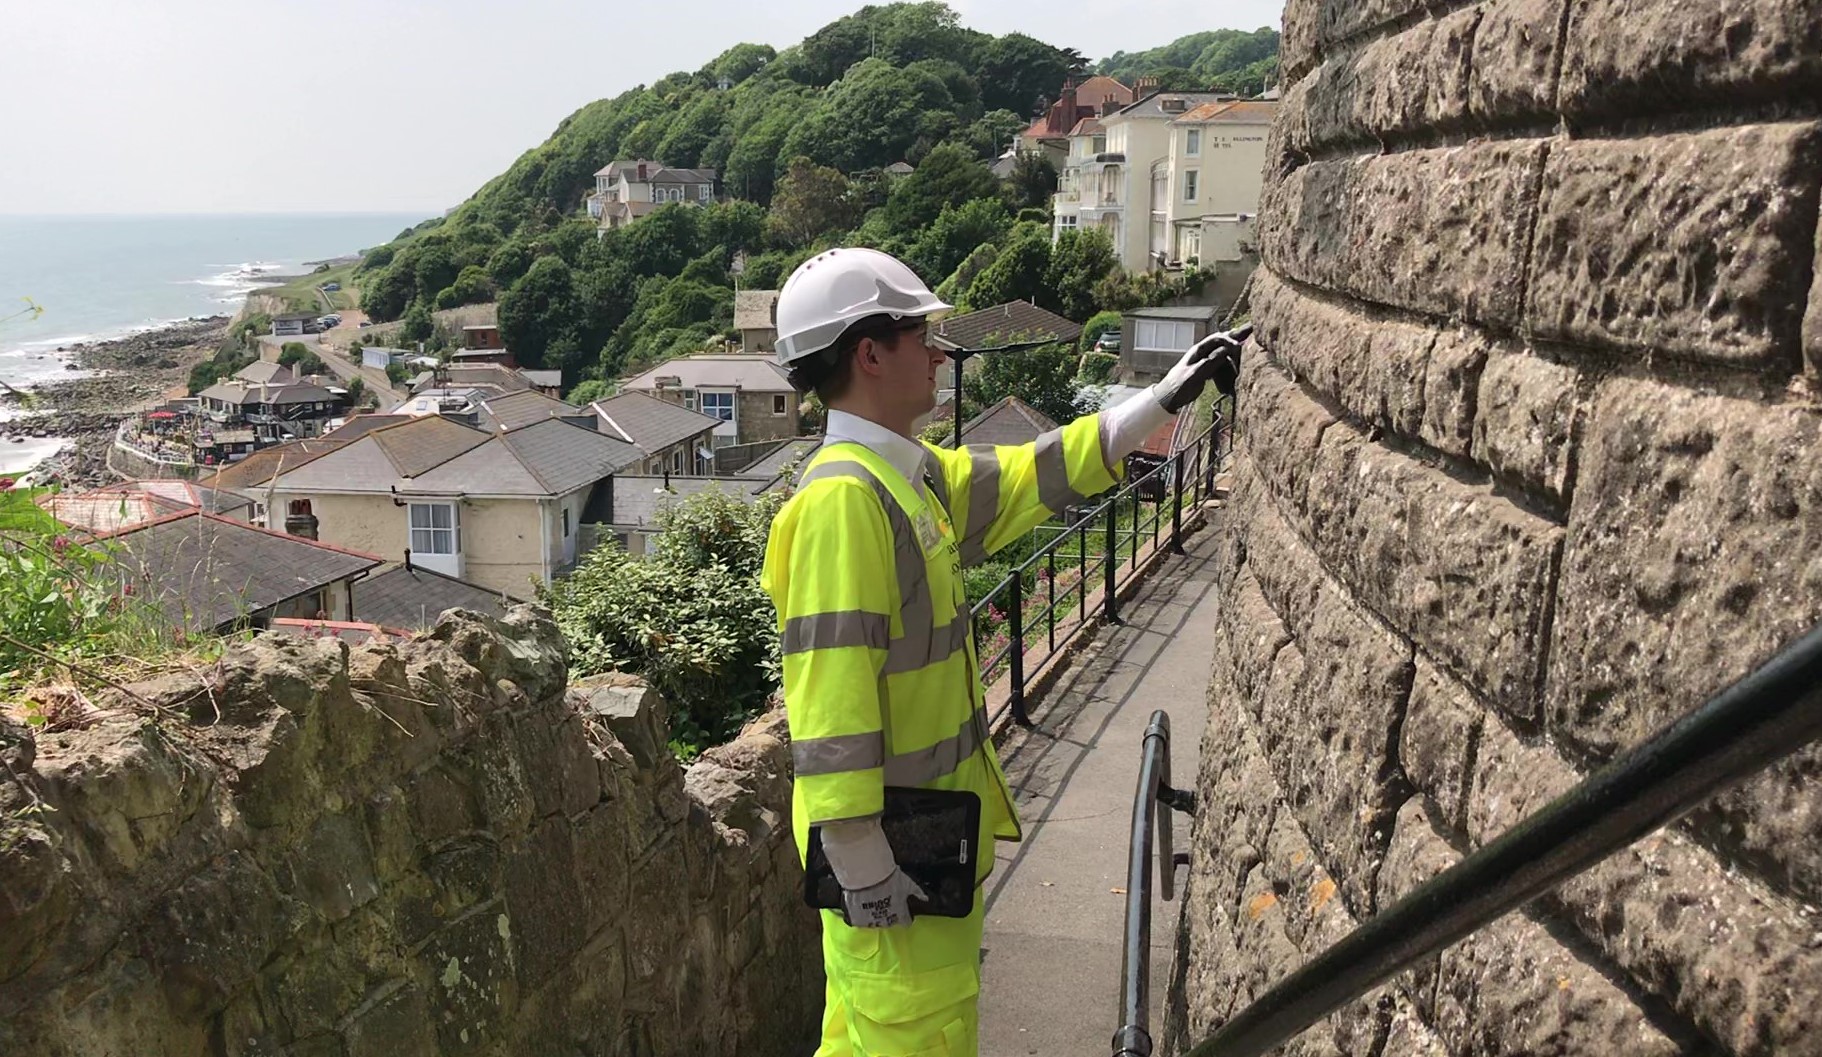 Photo showing a man in protective uniform (PPE) inspecting a wall with the town of Ventnor and seaside in the background